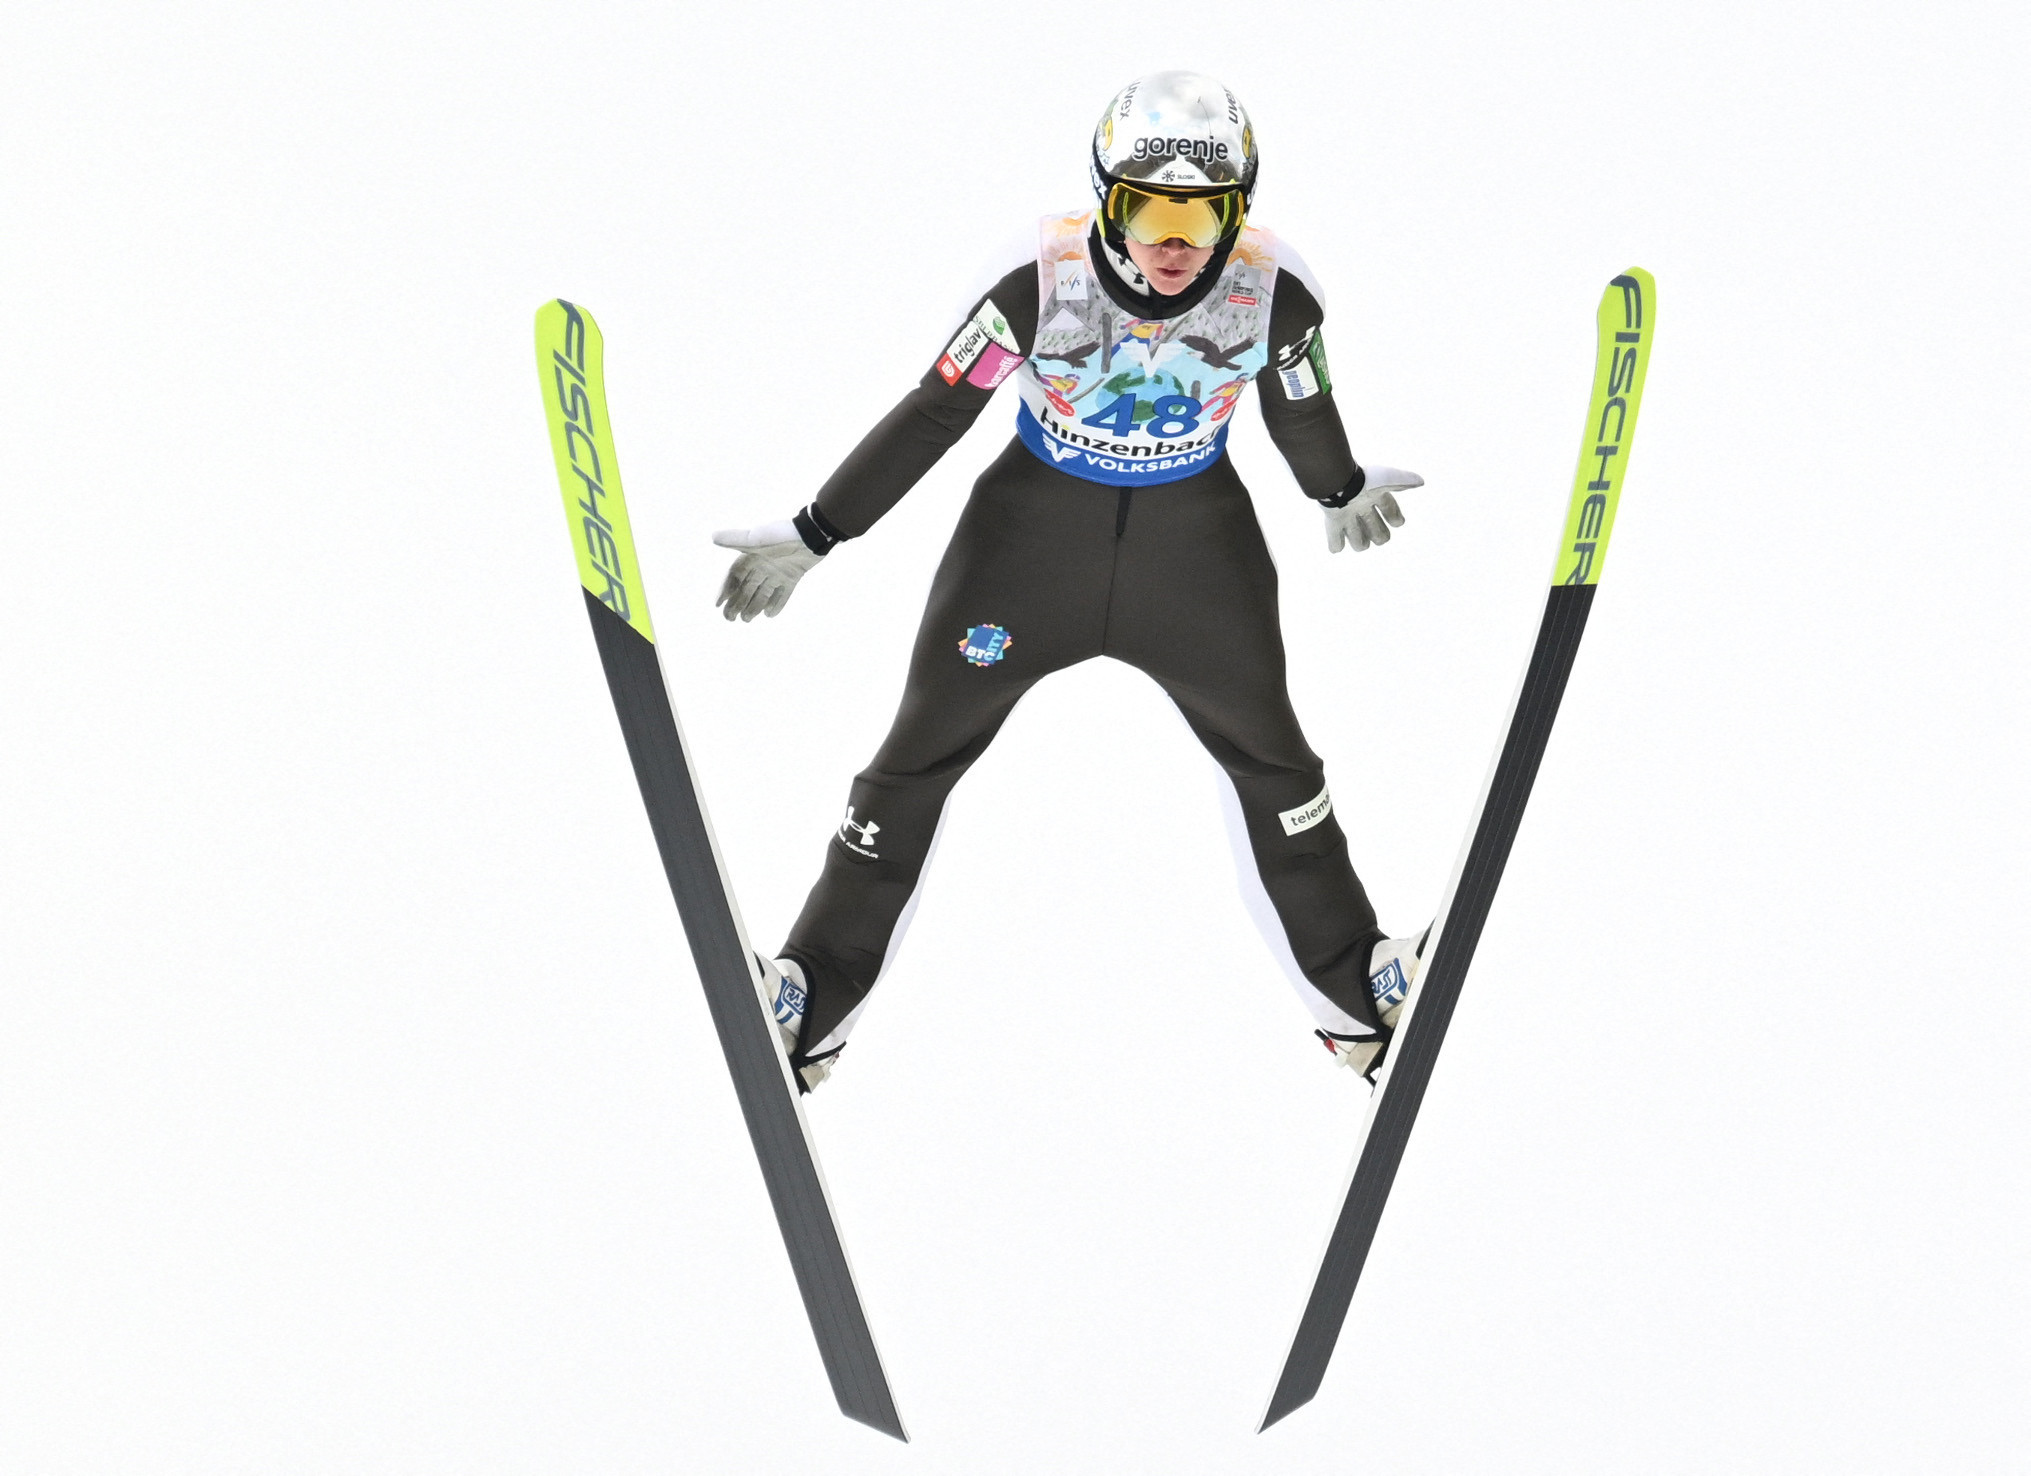 Slovenia dominant in mixed team event at Oslo Ski Jumping World Cup